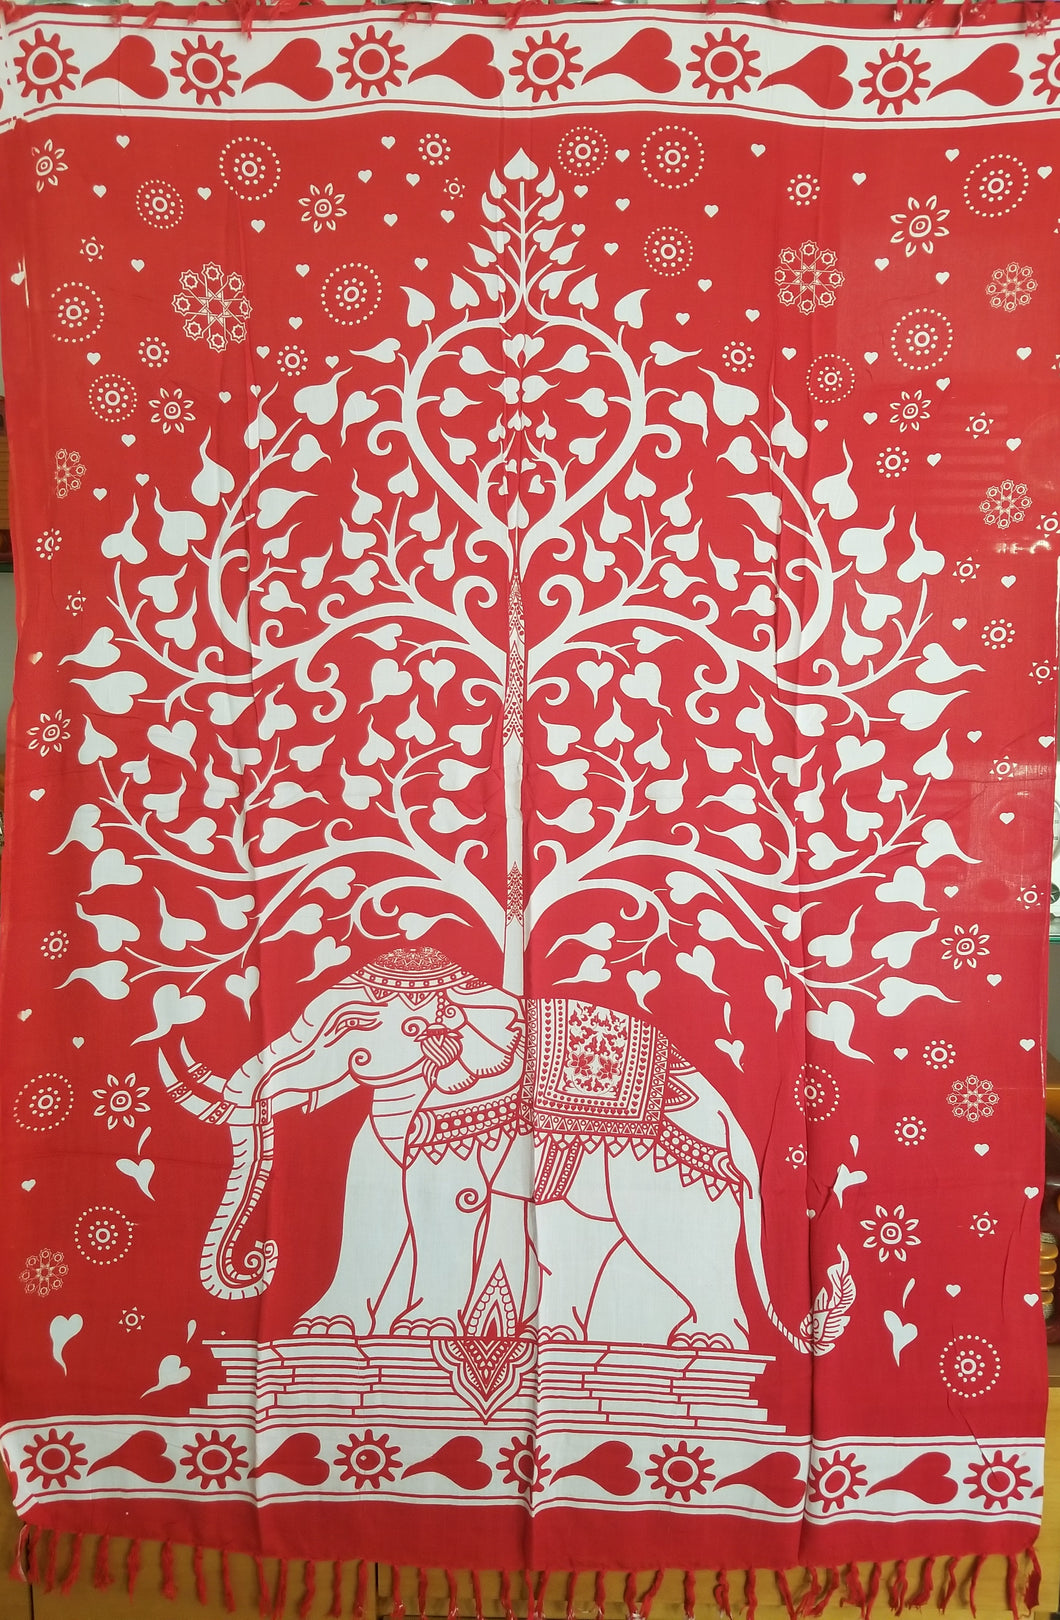 The Elephant Tree in Red